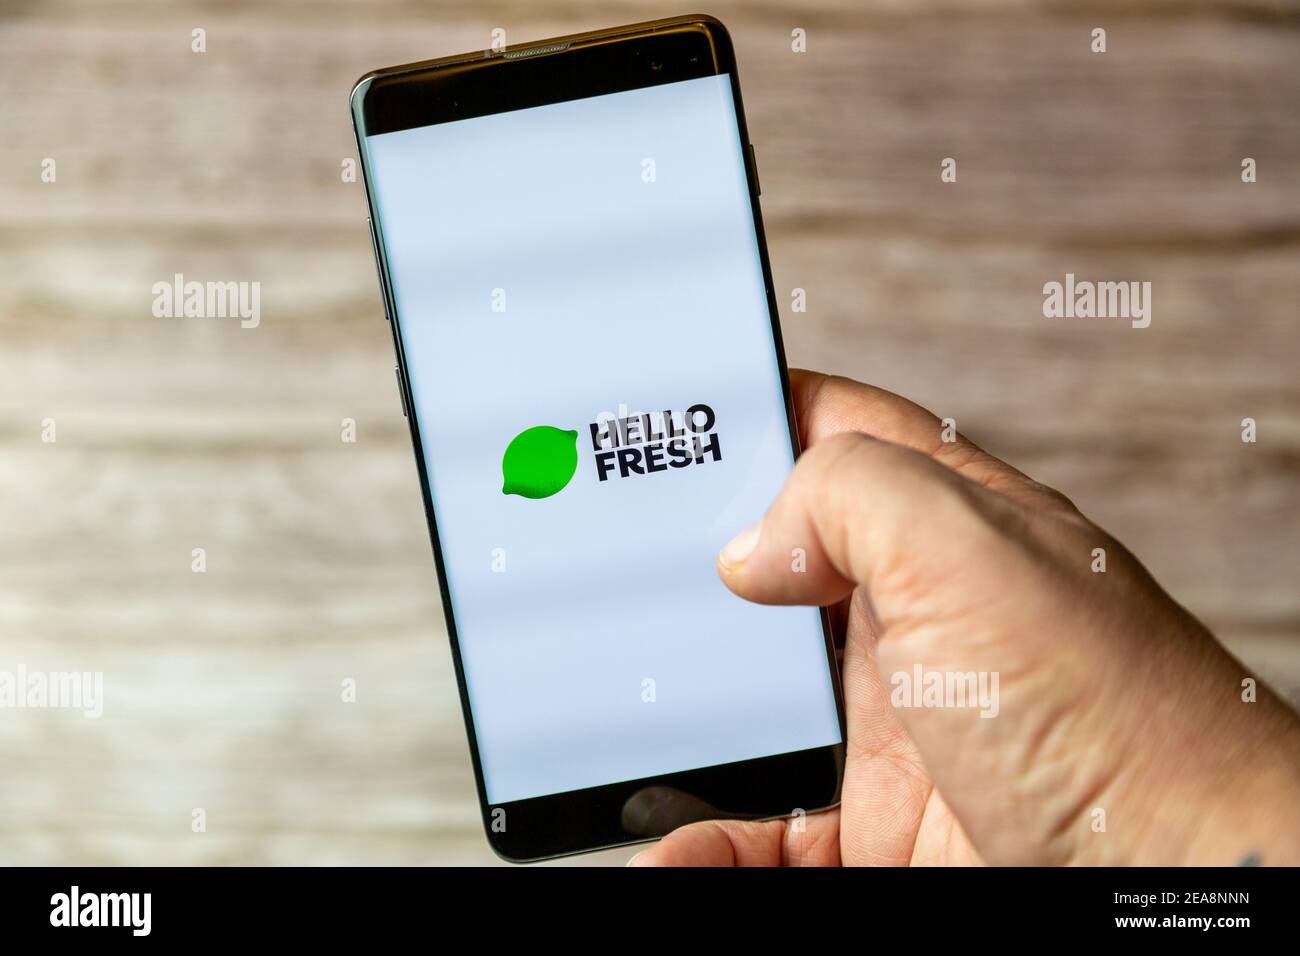 A mobile phone or cell phone being held in a hand with the Hello Fresh app open on screen Stock Photo